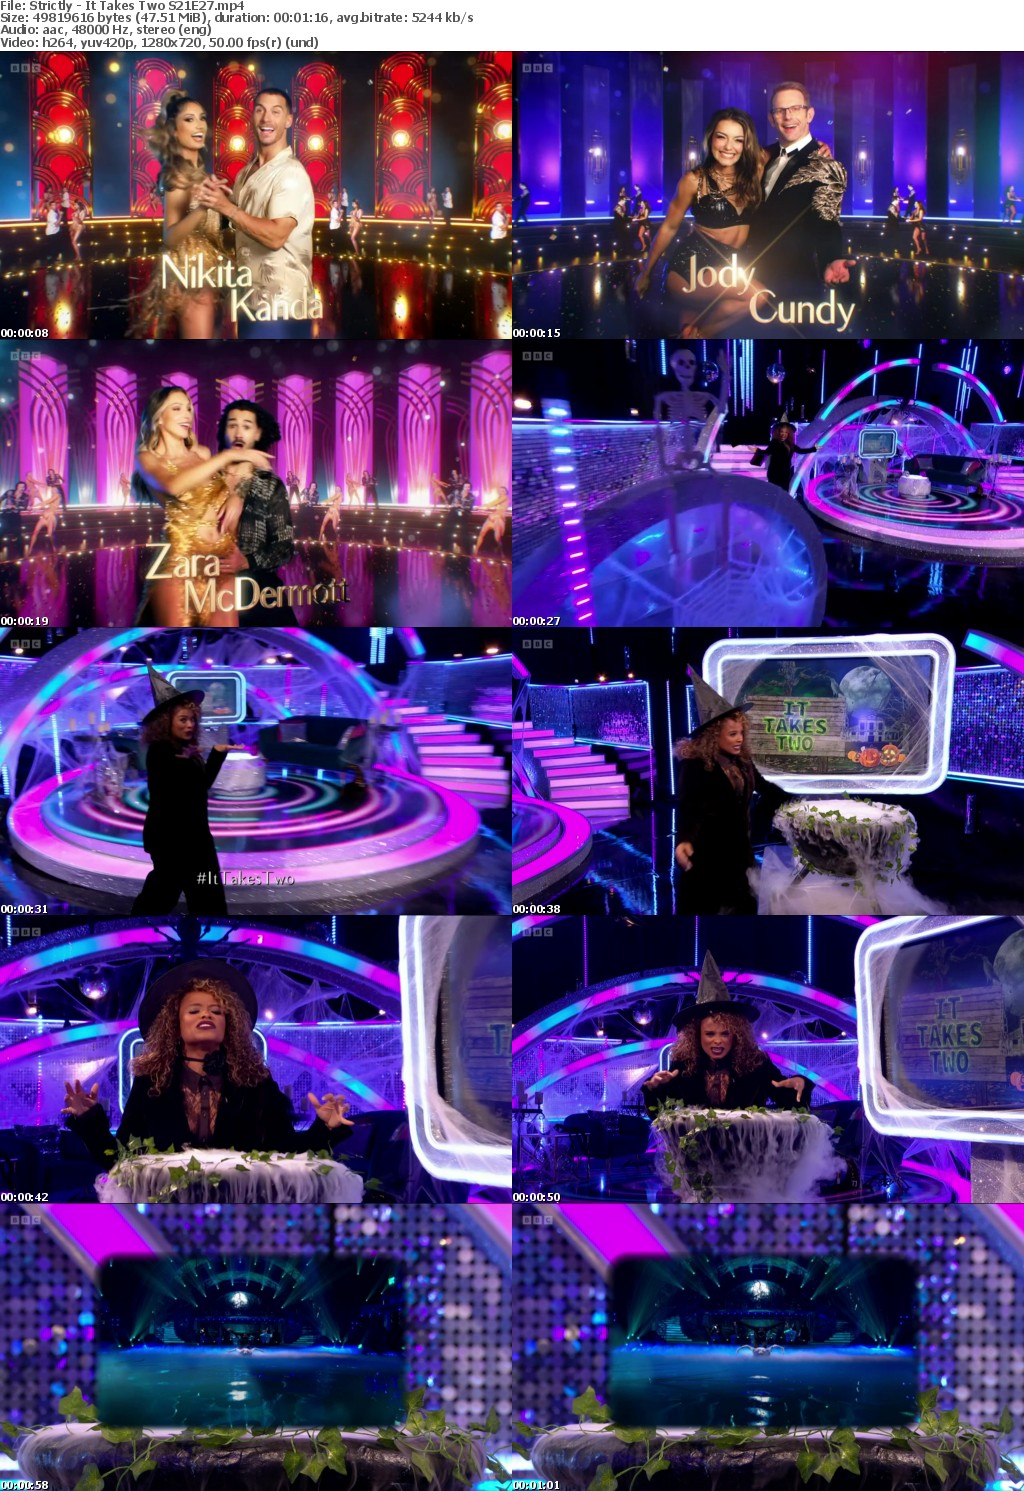 Strictly - It Takes Two S21E27 (1280x720p HD, 50fps, soft Eng subs)